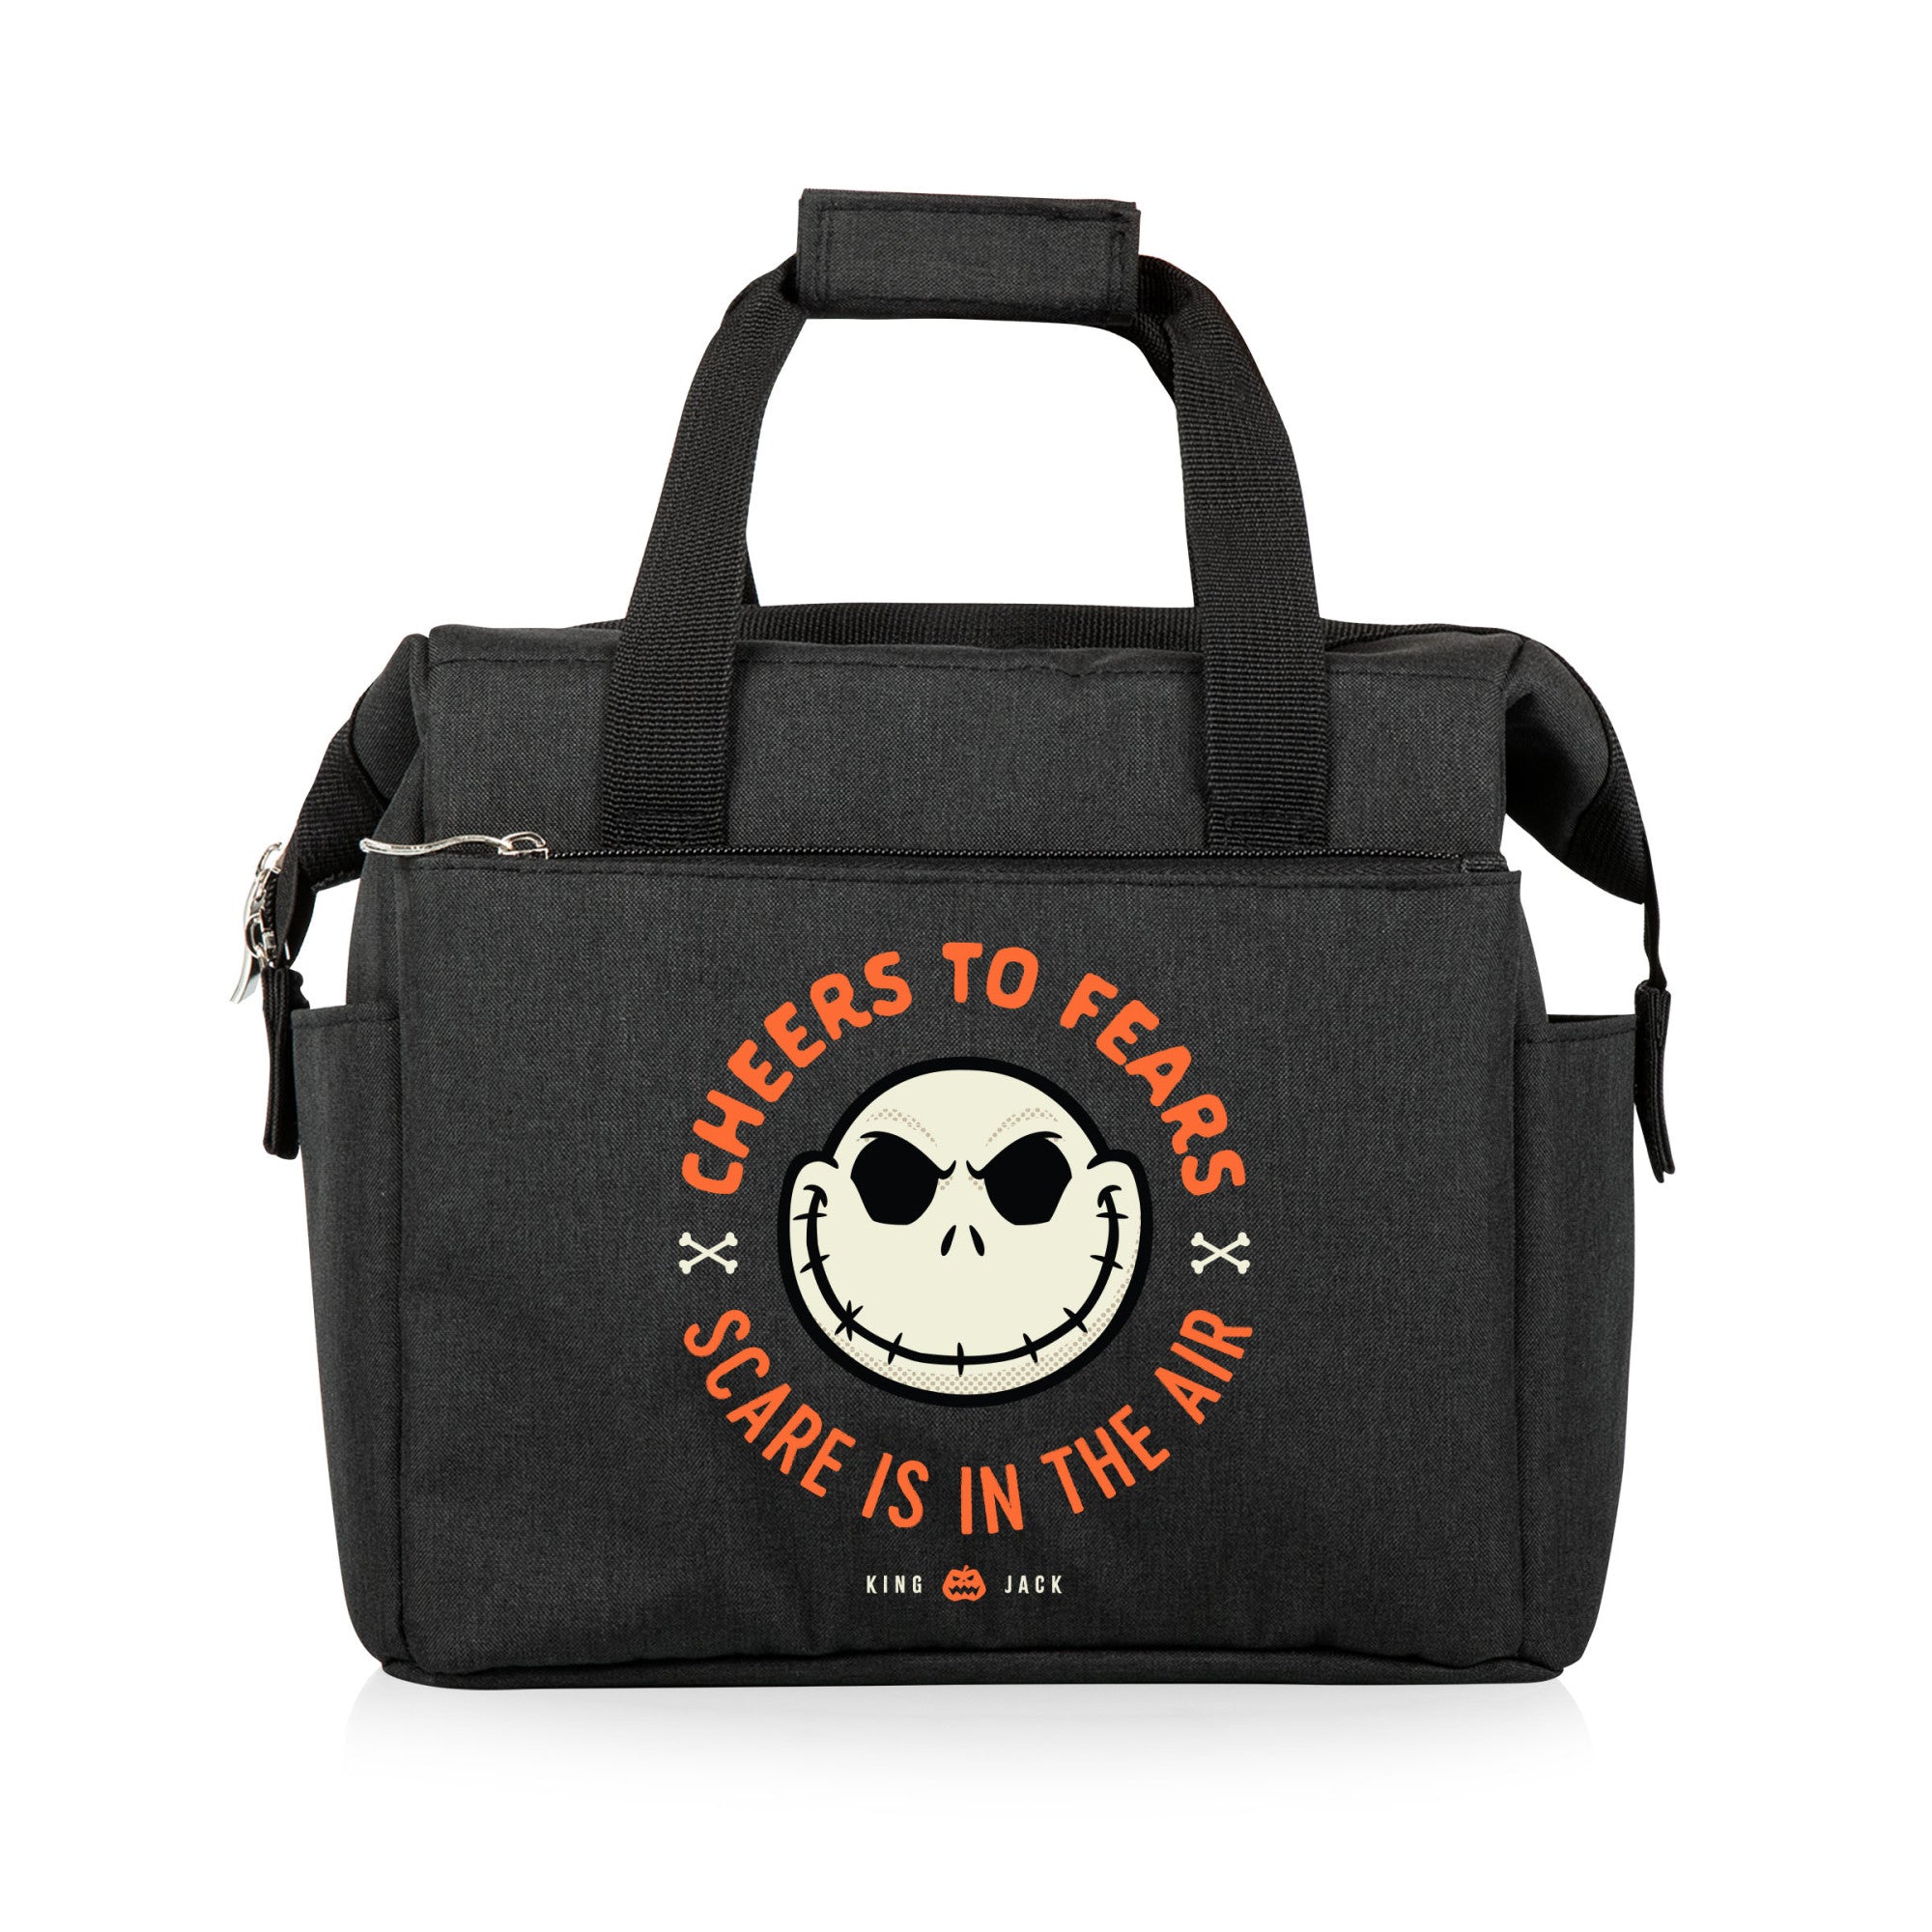 Nightmare Before Christmas Jack - On The Go Lunch Bag Cooler